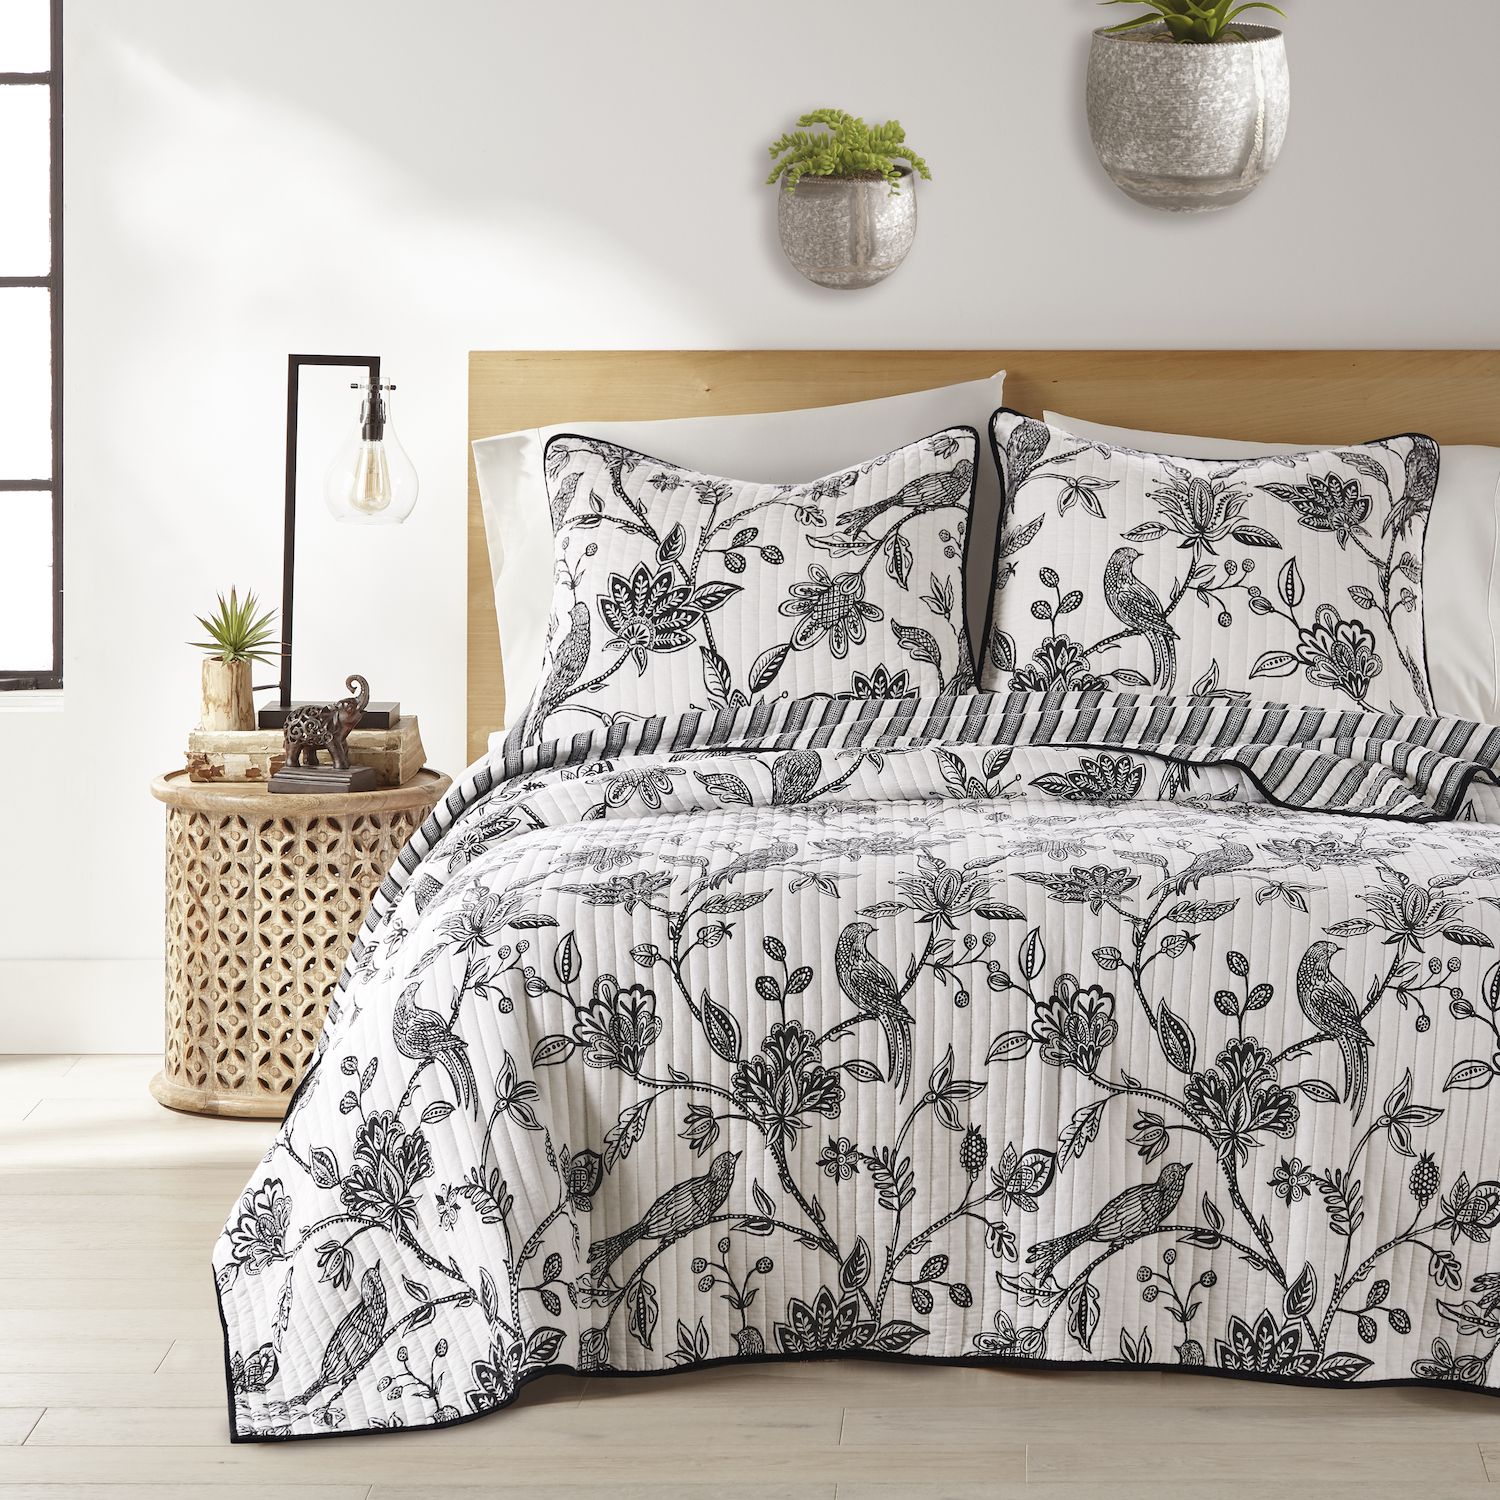 Image for Levtex Home Tanzie Quilt Set and Shams at Kohl's.